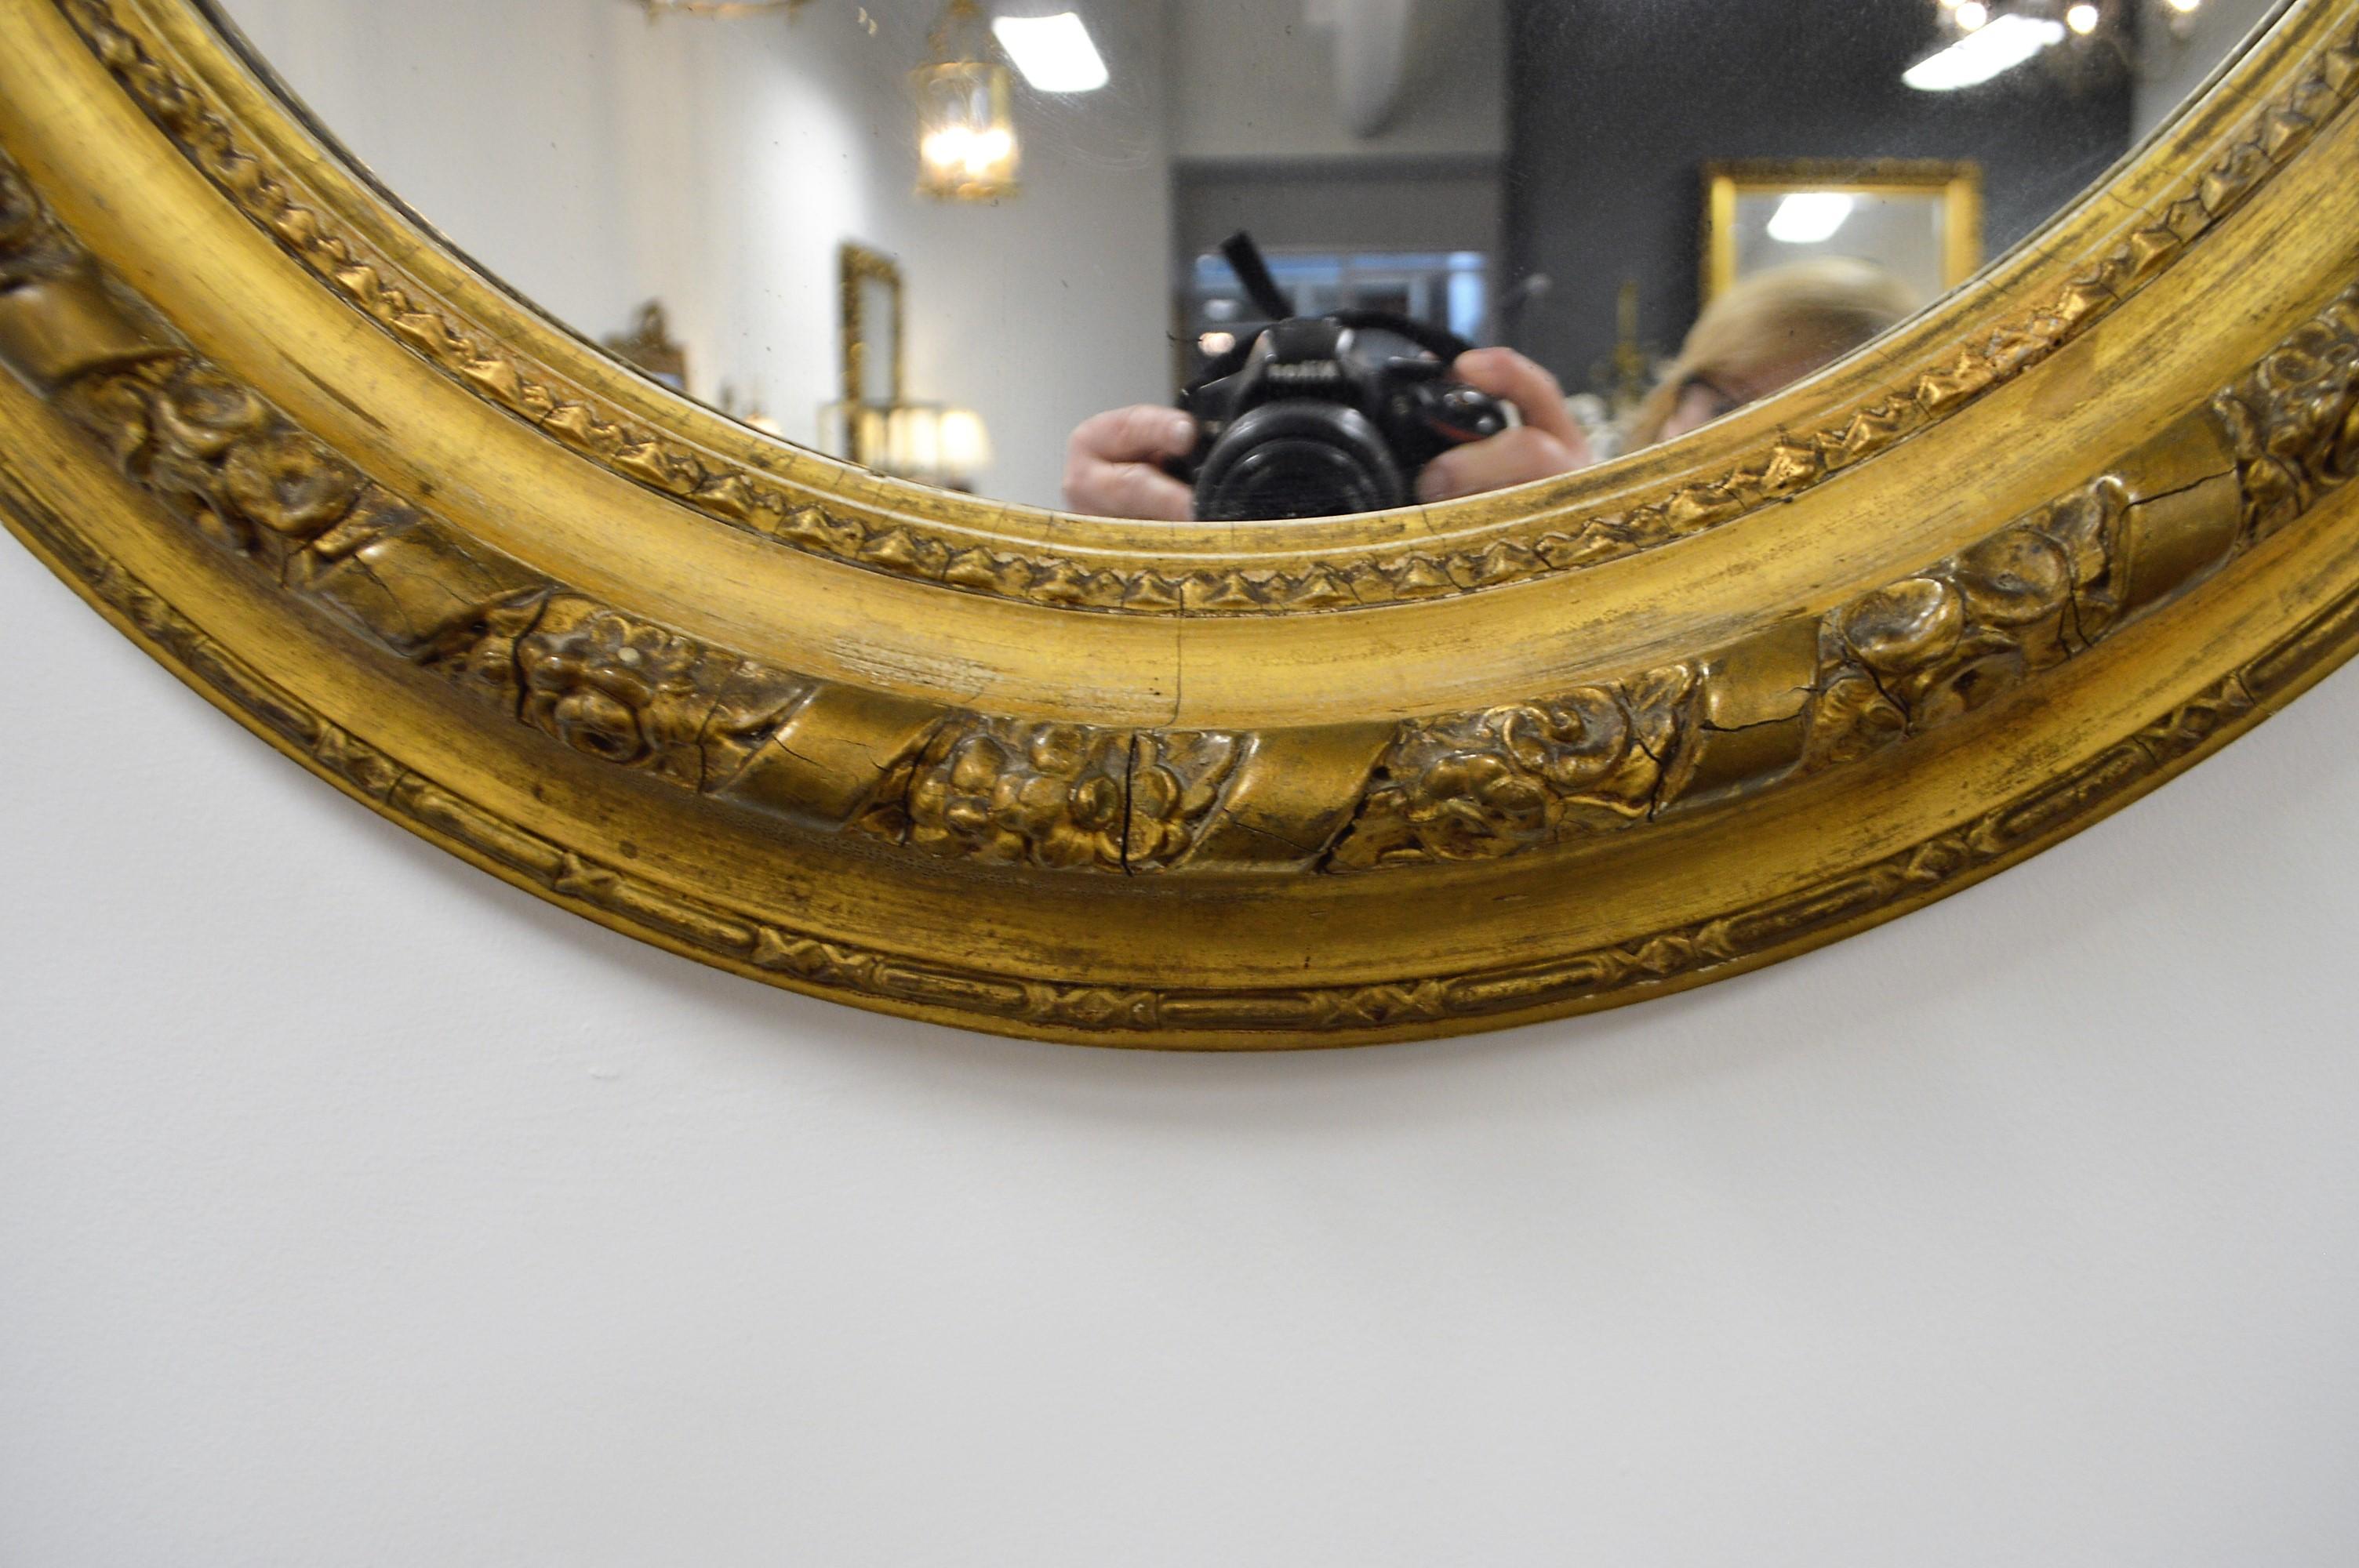 Floral and ribbon carving all around the frame of this 19th century mirror from France. The frame has had some repair but the overall condition is good. There is an nice aged patina to the leaf gilding.